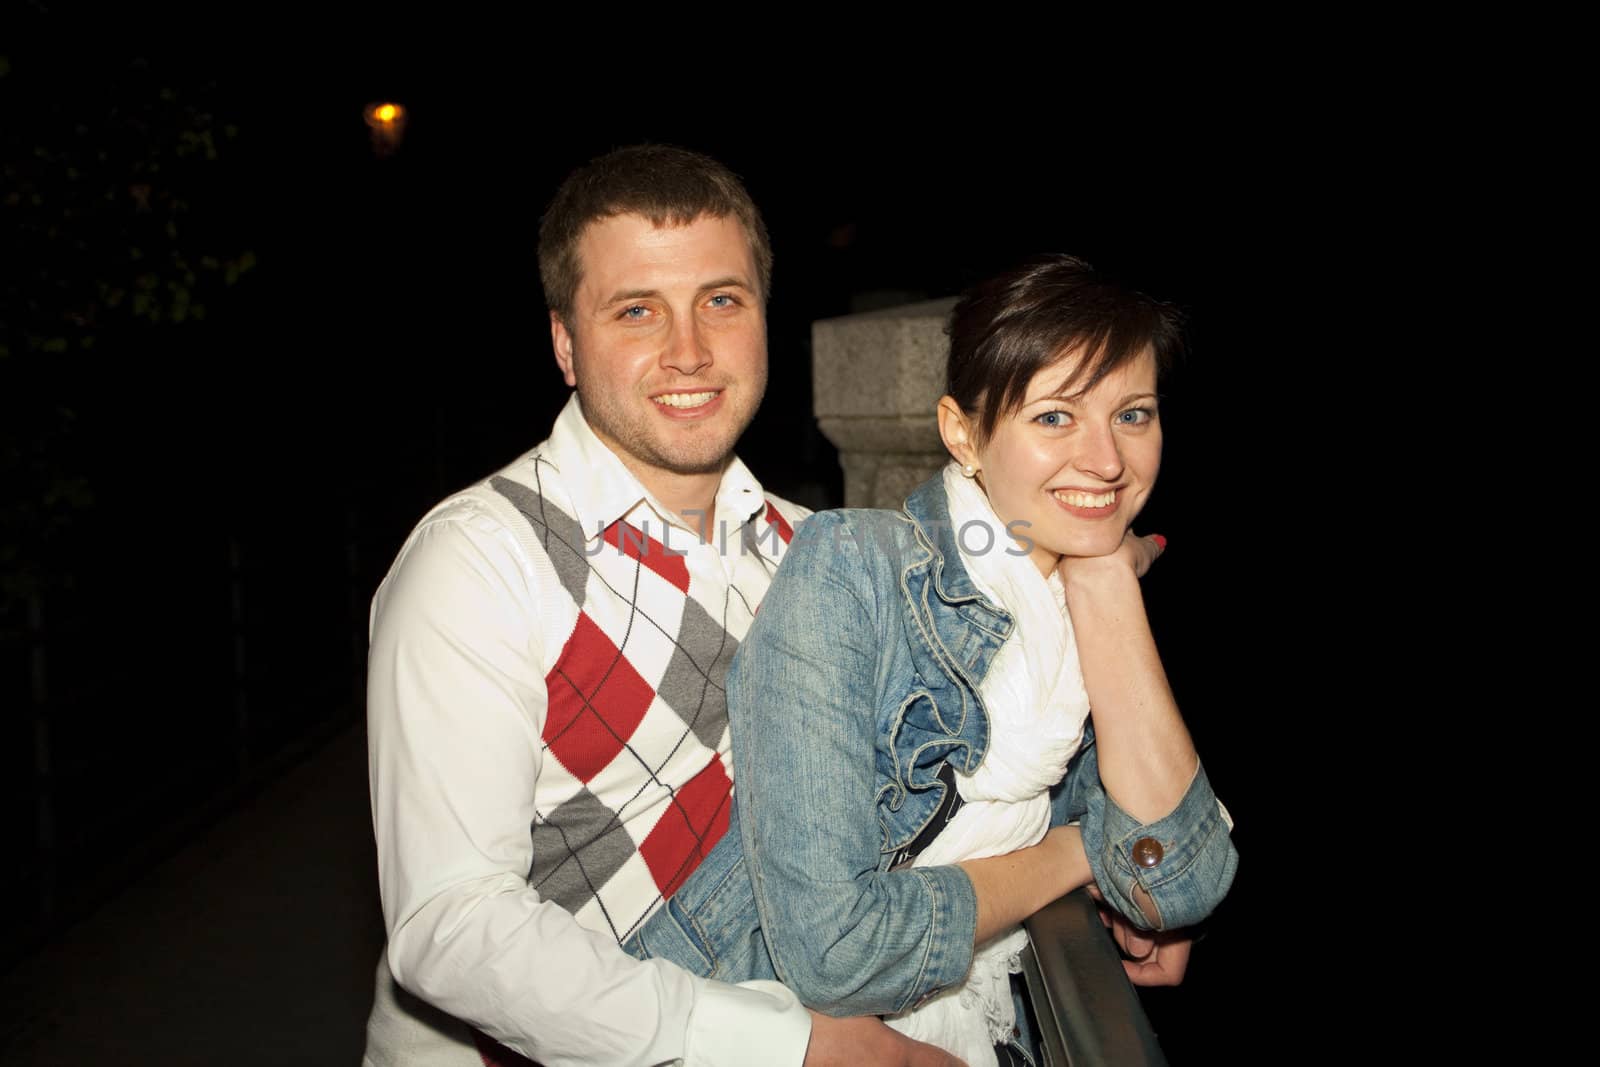 young couple on the streets of Prague nightlife by jannyjus